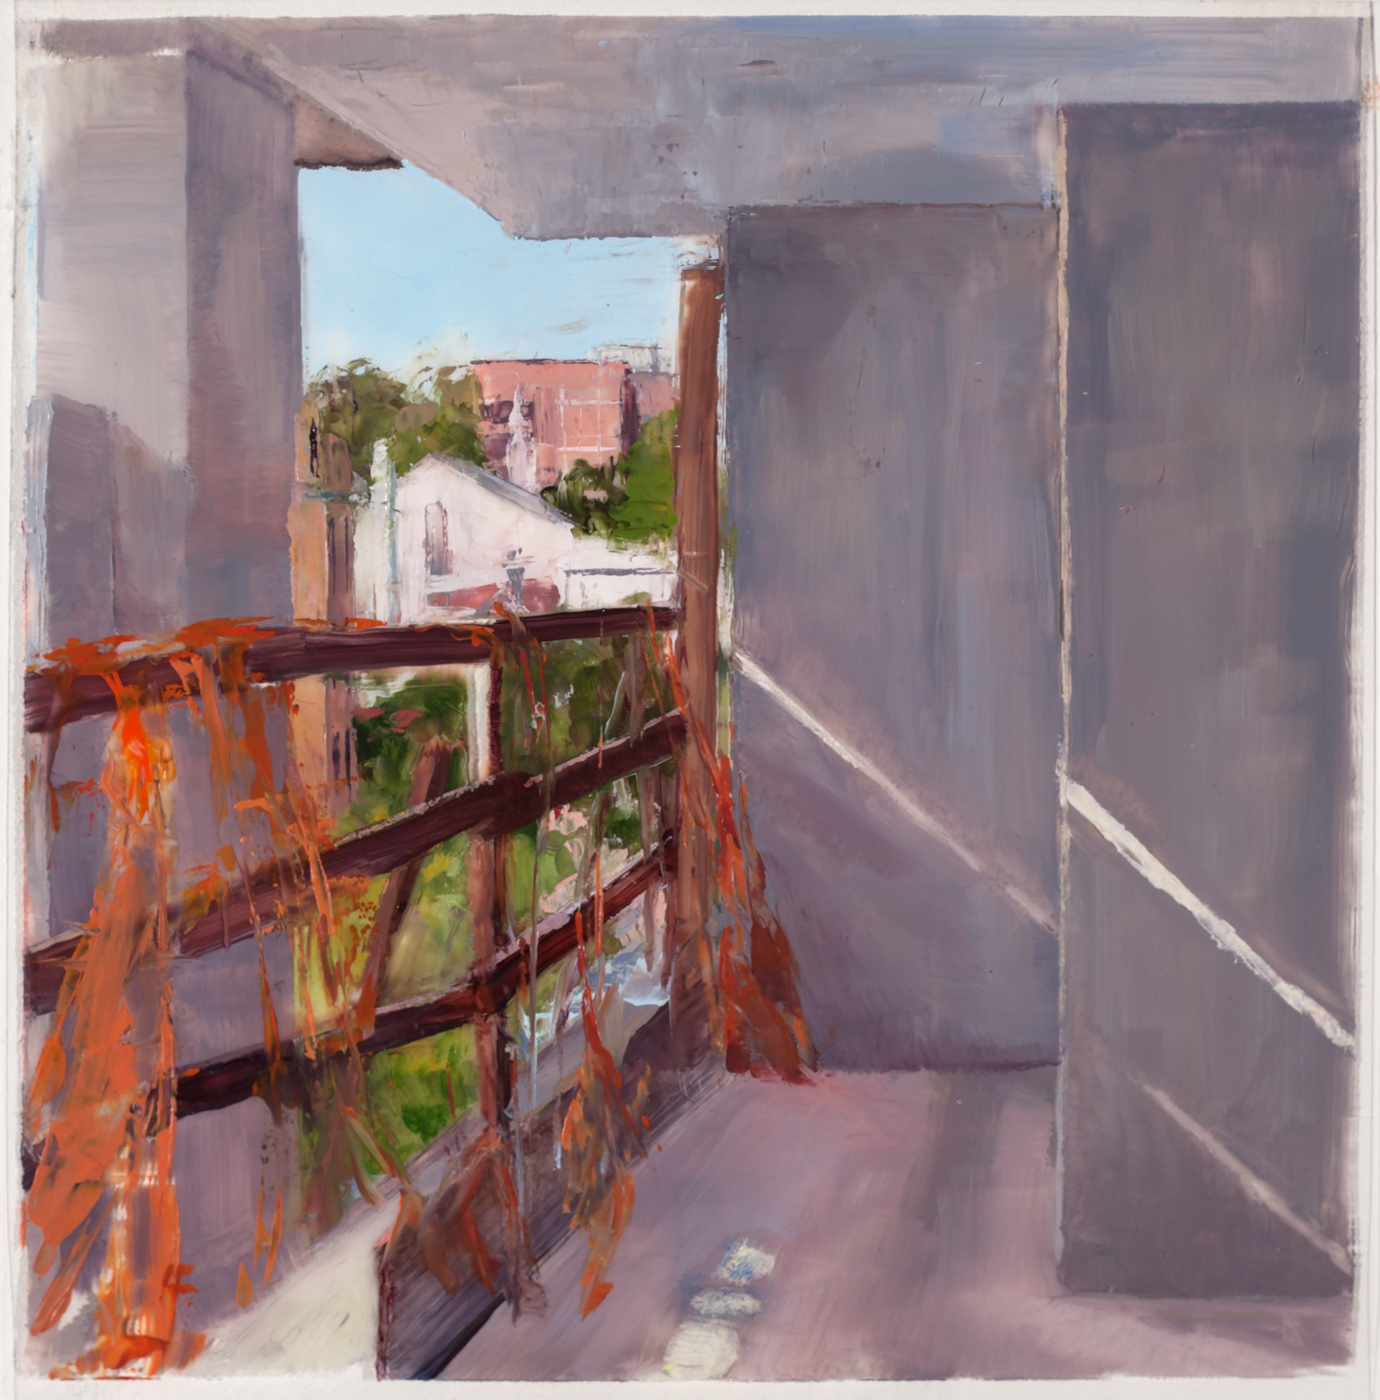   On-site study for 163rd St 1 , 2017 oil on dura-lar, 6 x 6 in 